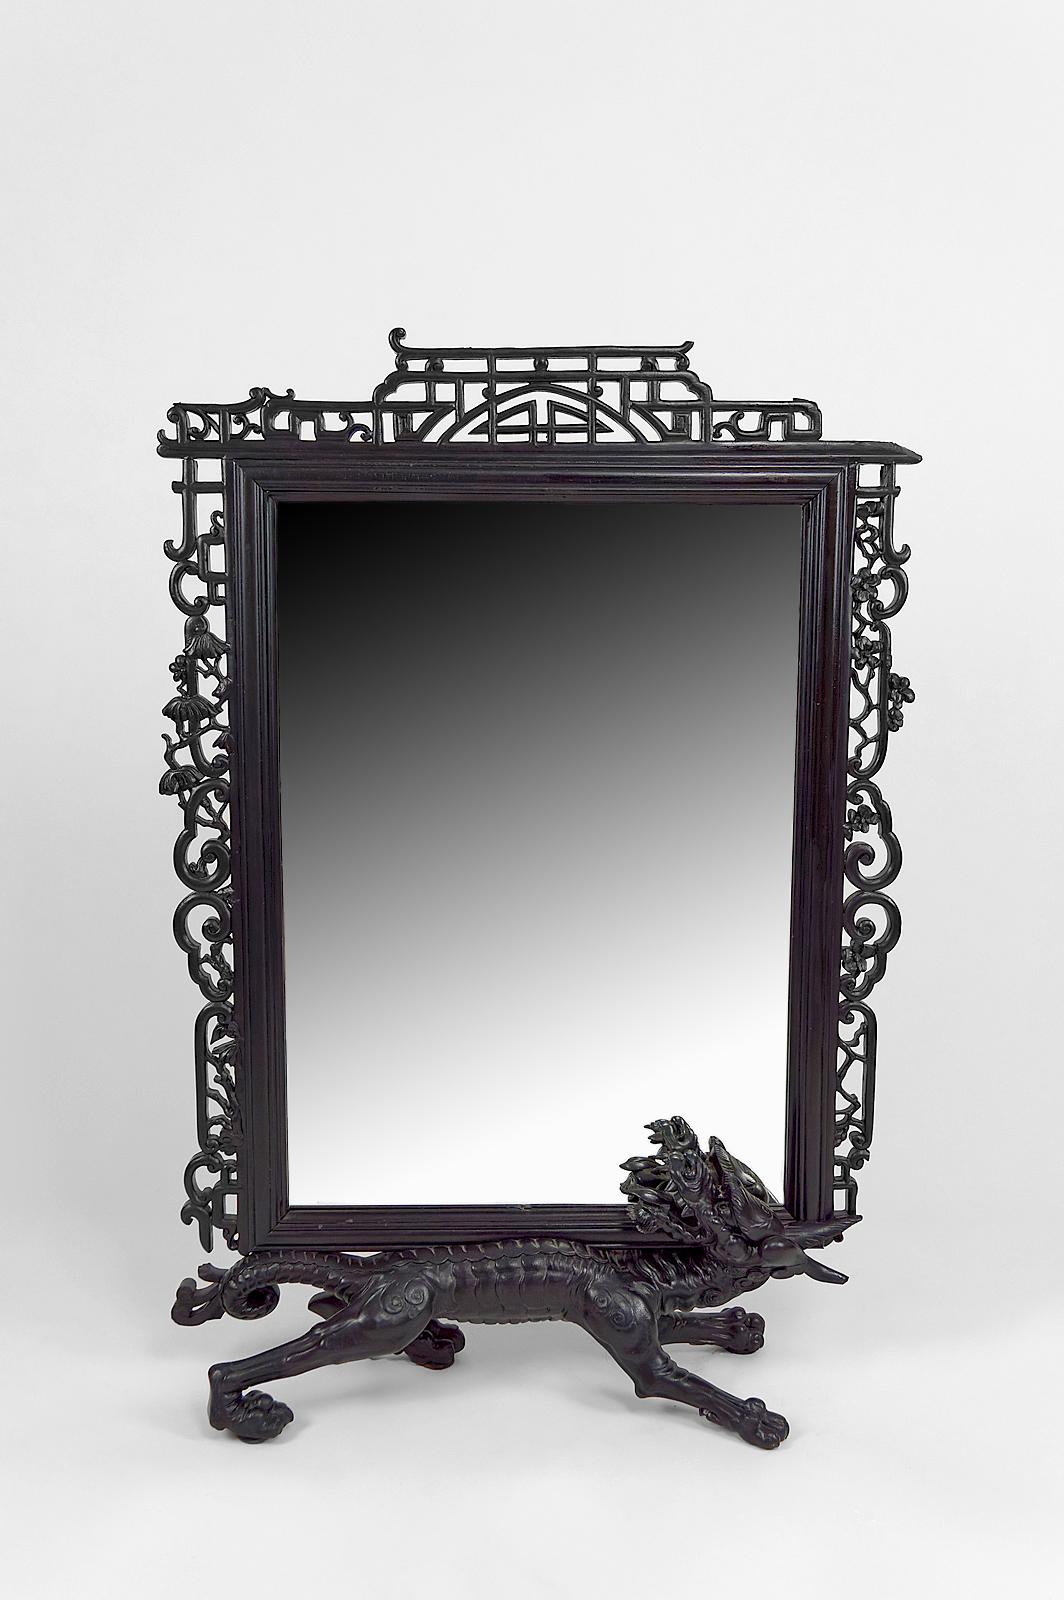 Superb Japanese-style mantel / fireplace mirror in lacquered wood, carved with an imposing dragon and decorative motifs.

Japonism, France, circa 1880.
Attributed to Gabriel Viardot (1830-1904), famous Parisian cabinetmaker specializing in the